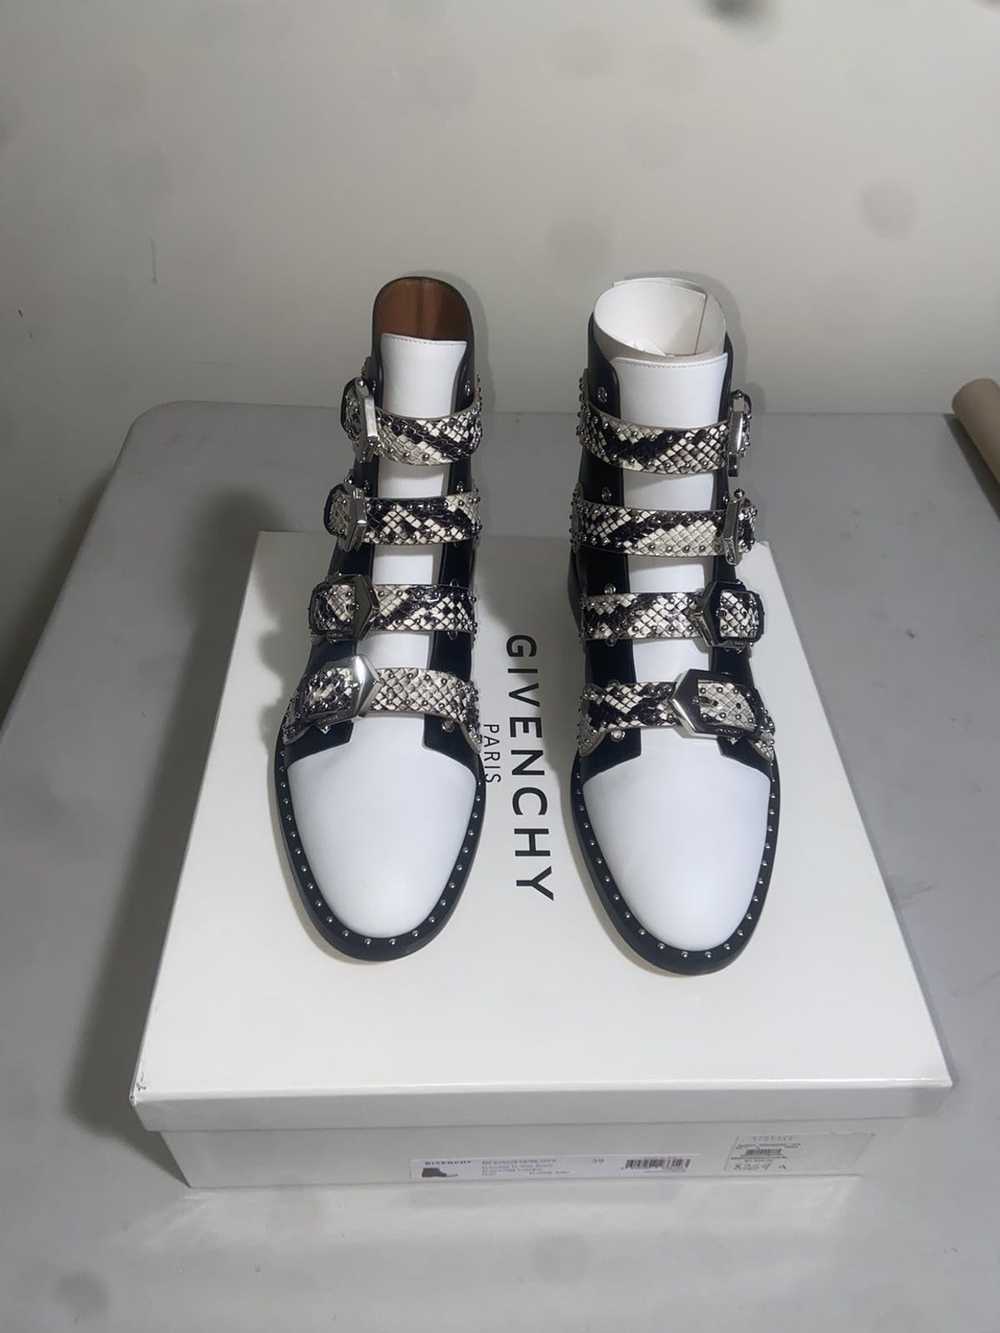 Givenchy Givenchy women’s Boots sz 39w(9w) - image 1